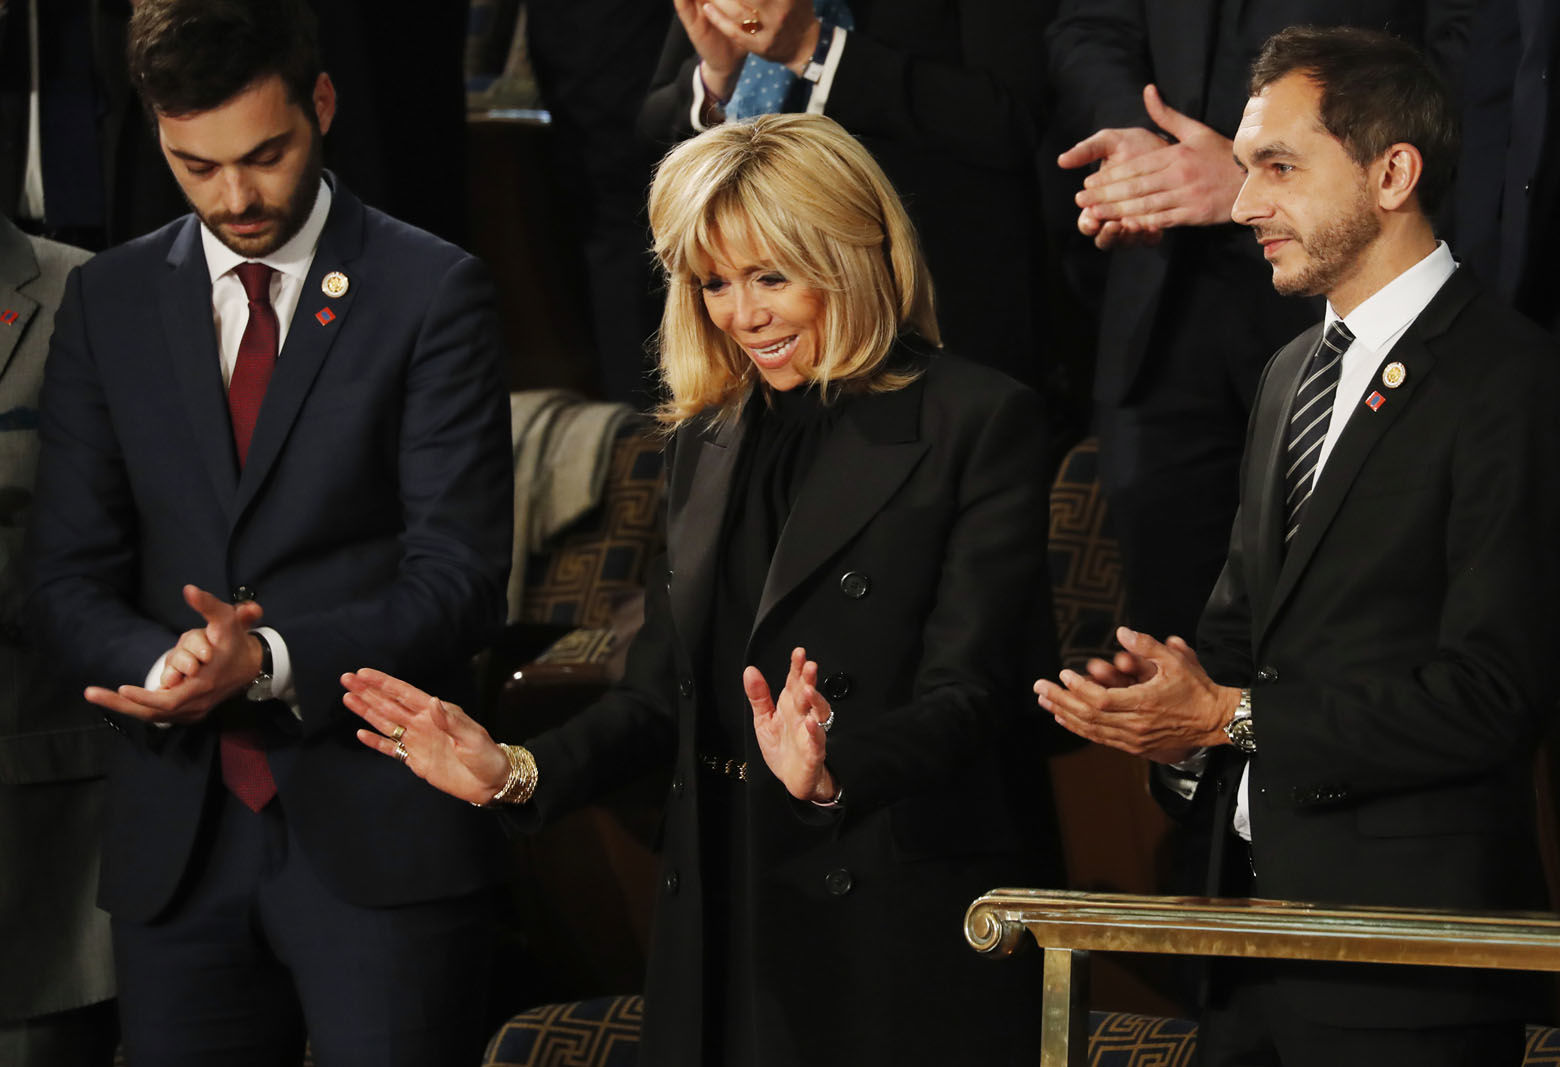 Brigitte Macron waves as she arrives ahead of French President Emmanuel Macron address to a joint meeting of Congress on Capitol Hill in Washington, Wednesday, April 25, 2018. (AP Photo/Pablo Martinez Monsivais)